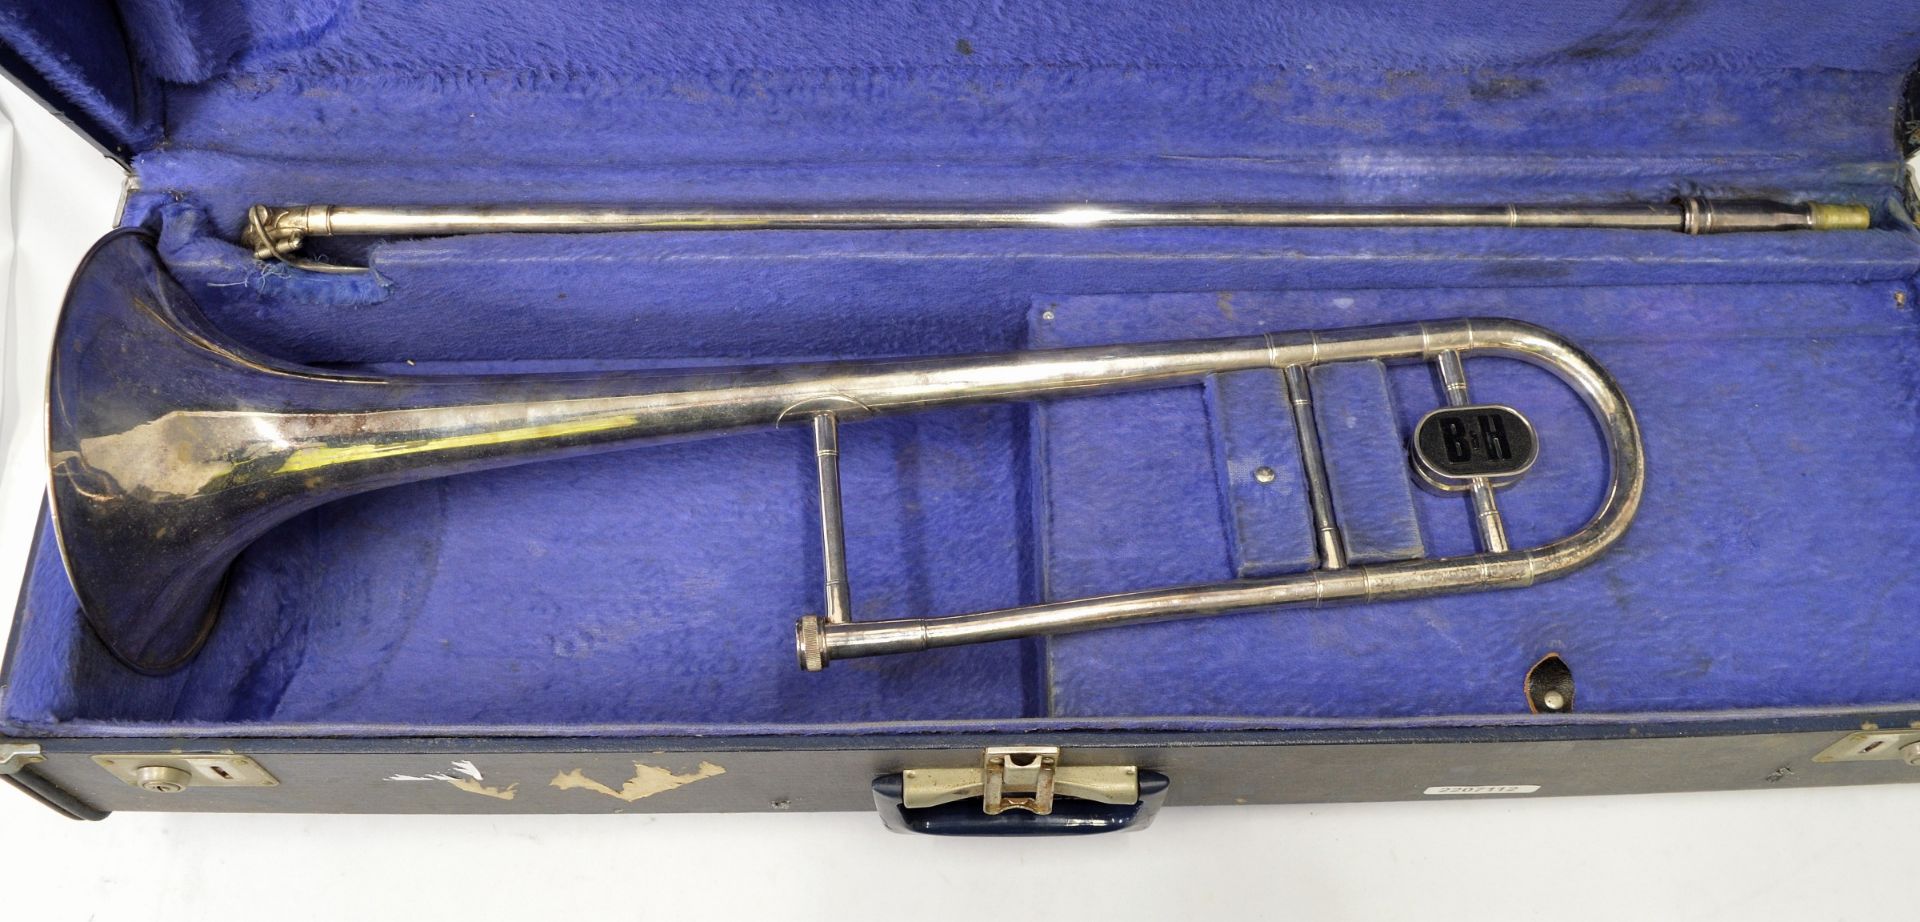 Boosey & Hawkes Trombone with Case. Damage to end of slide tube. Serial No. 655399. - Image 2 of 14